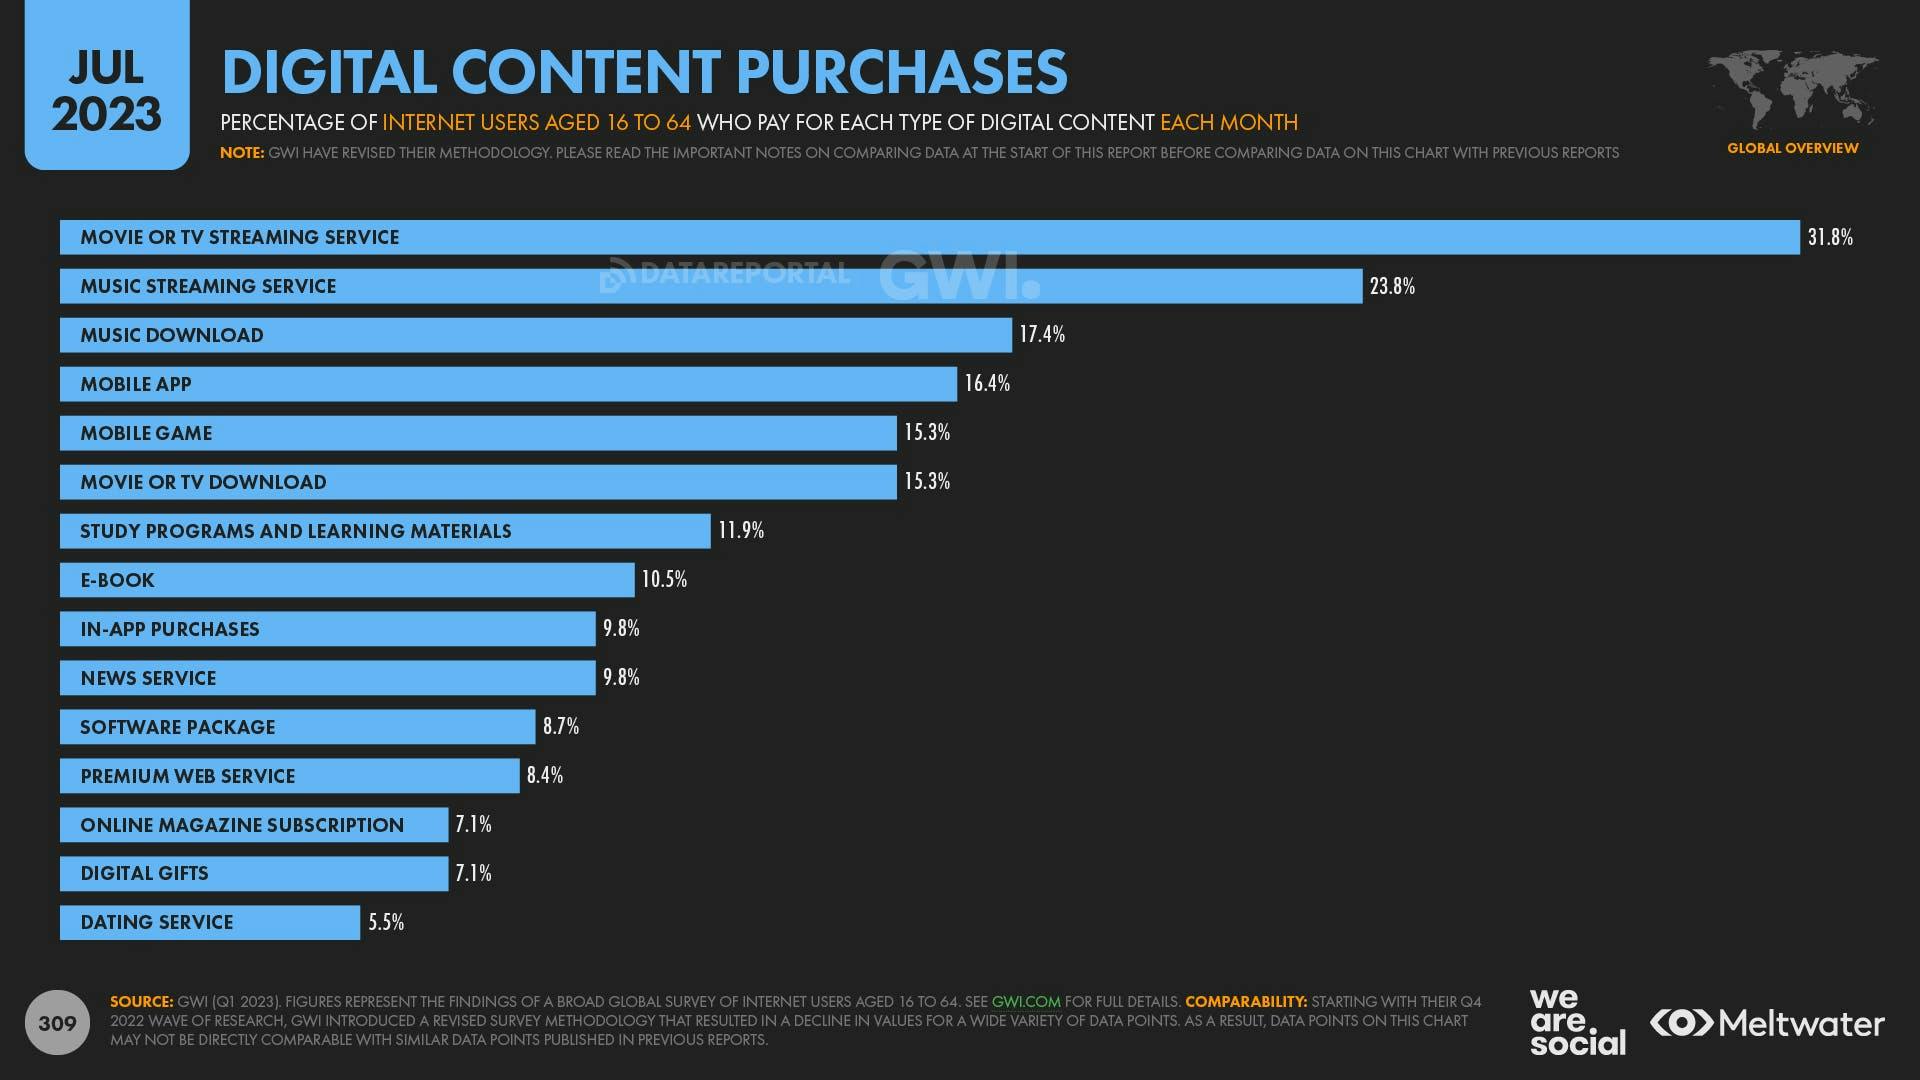 A bar chart showing the percentage of internet users who pay for each type of digital content each month.